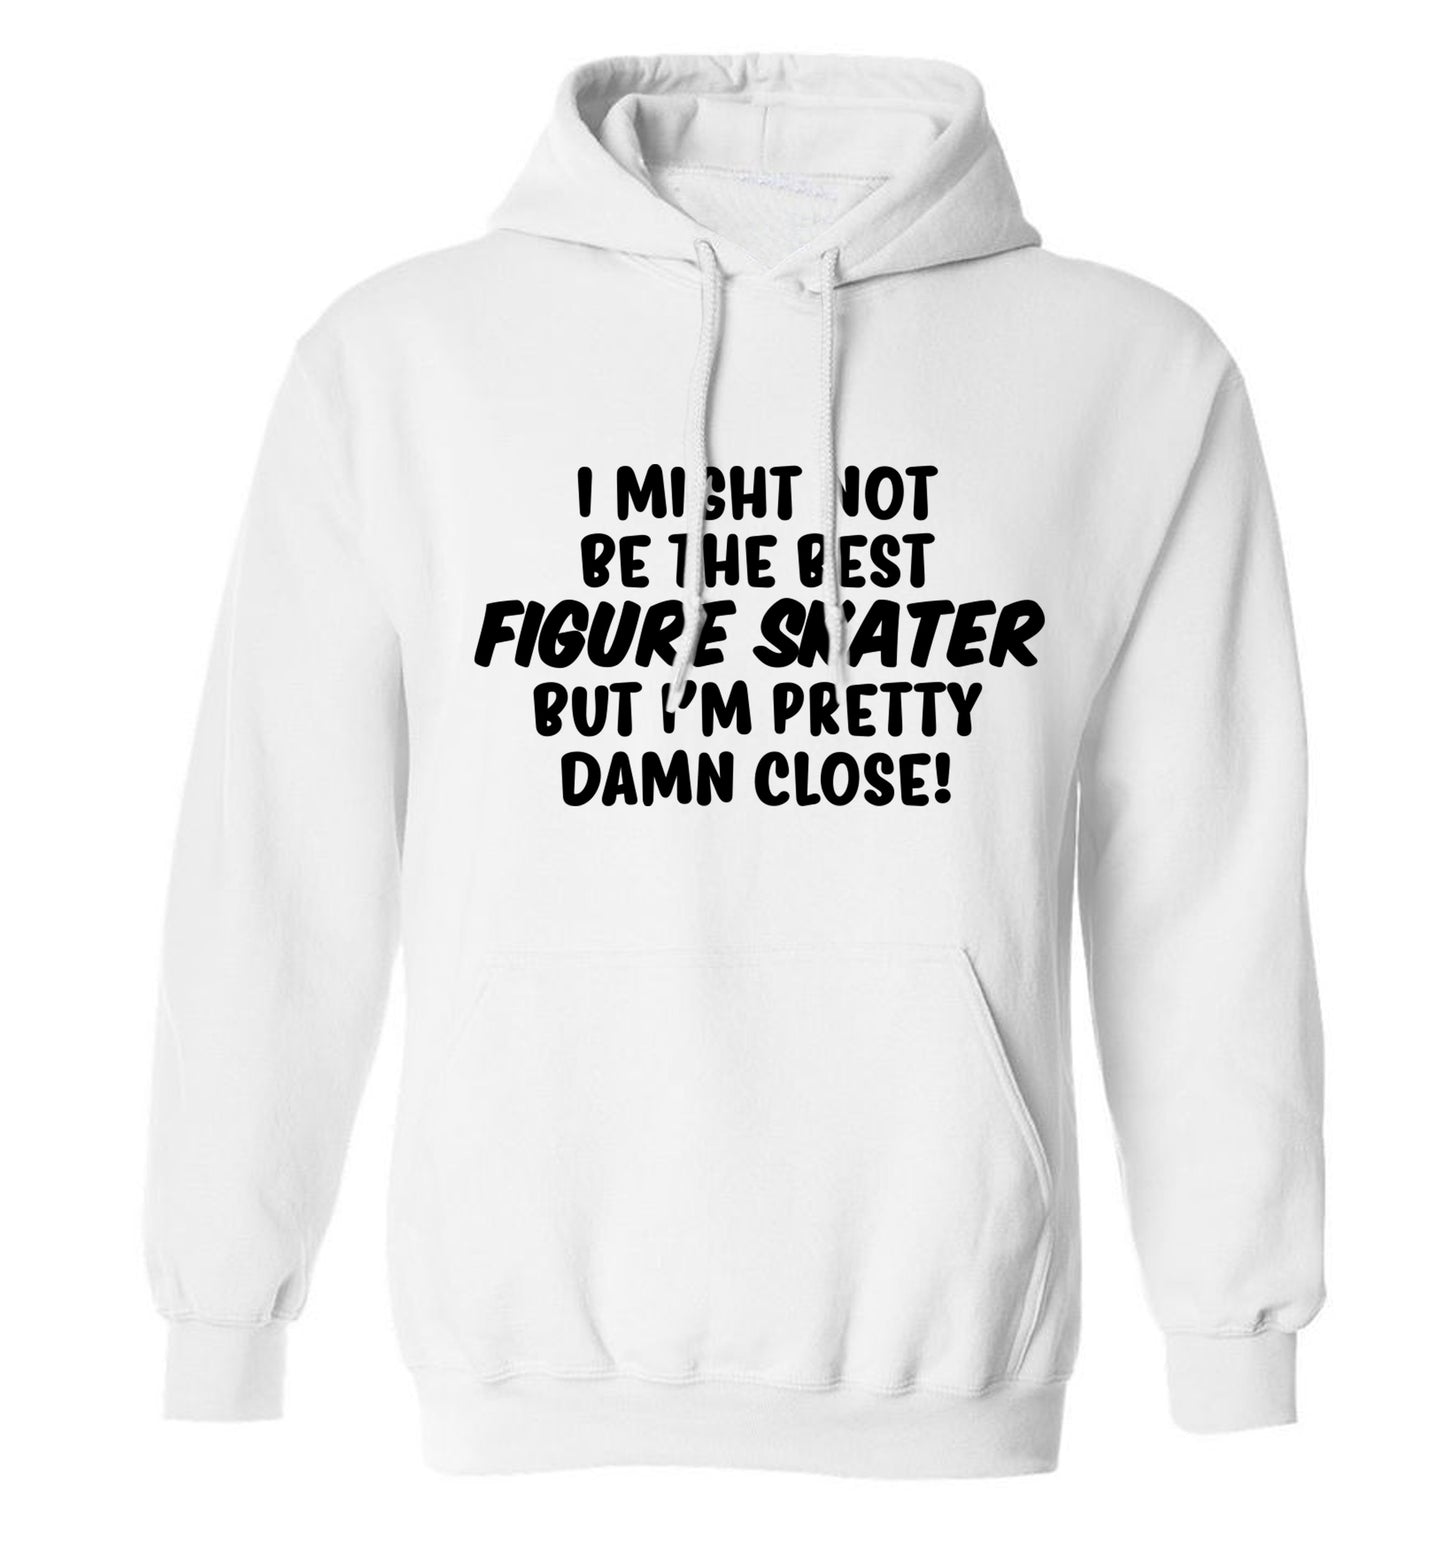 I might not be the best figure skater but I'm pretty damn close! adults unisexwhite hoodie 2XL